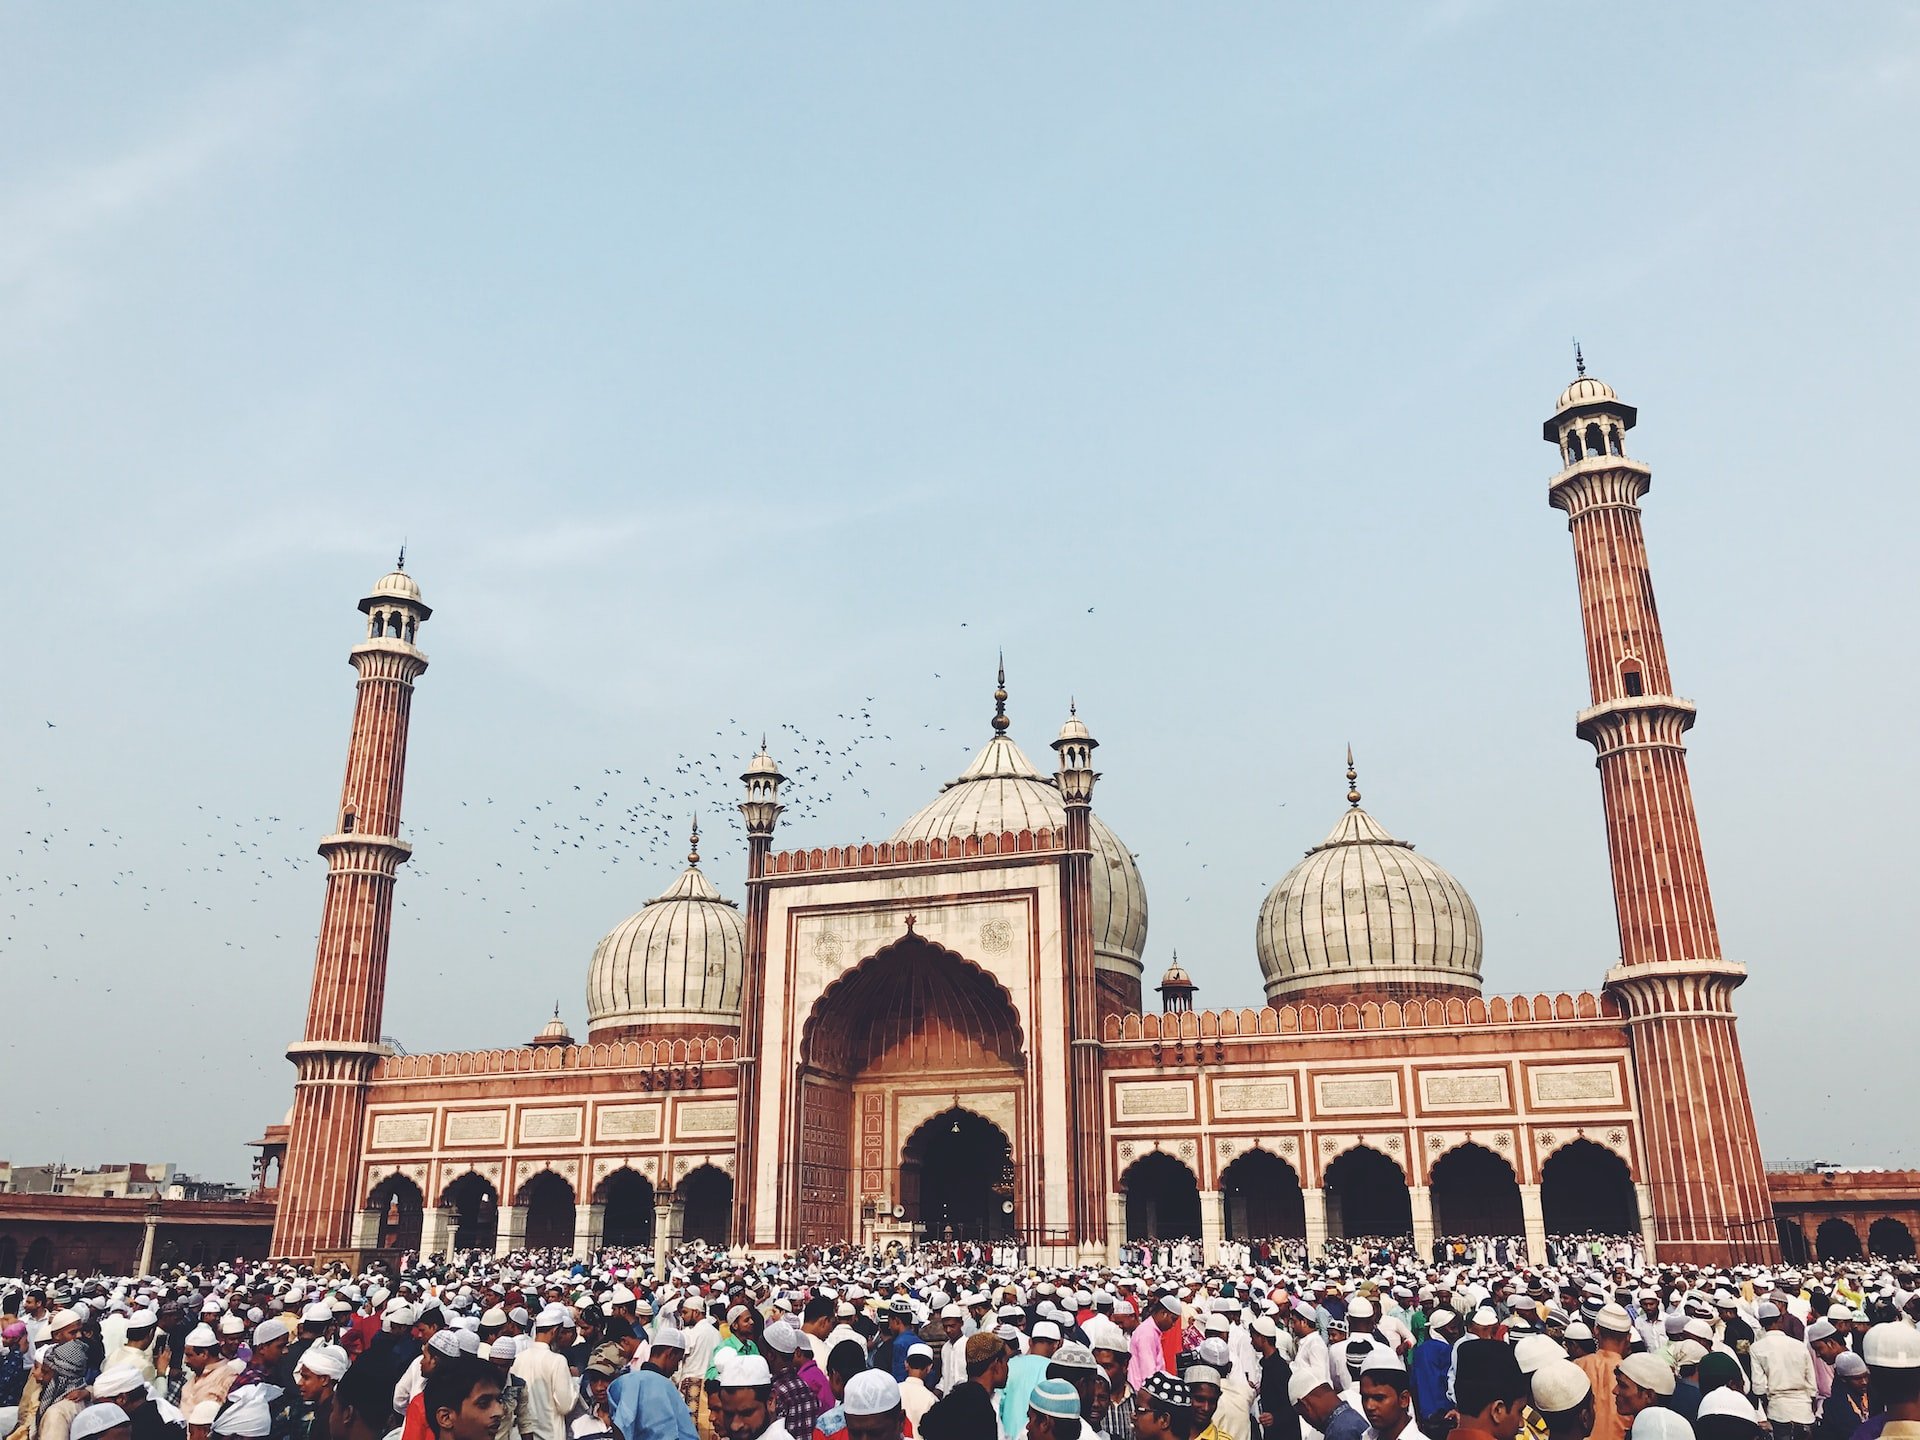 People gather at Jama Masjid, one of the most important historical places in Delhi (photo: Naveed Ahmed)